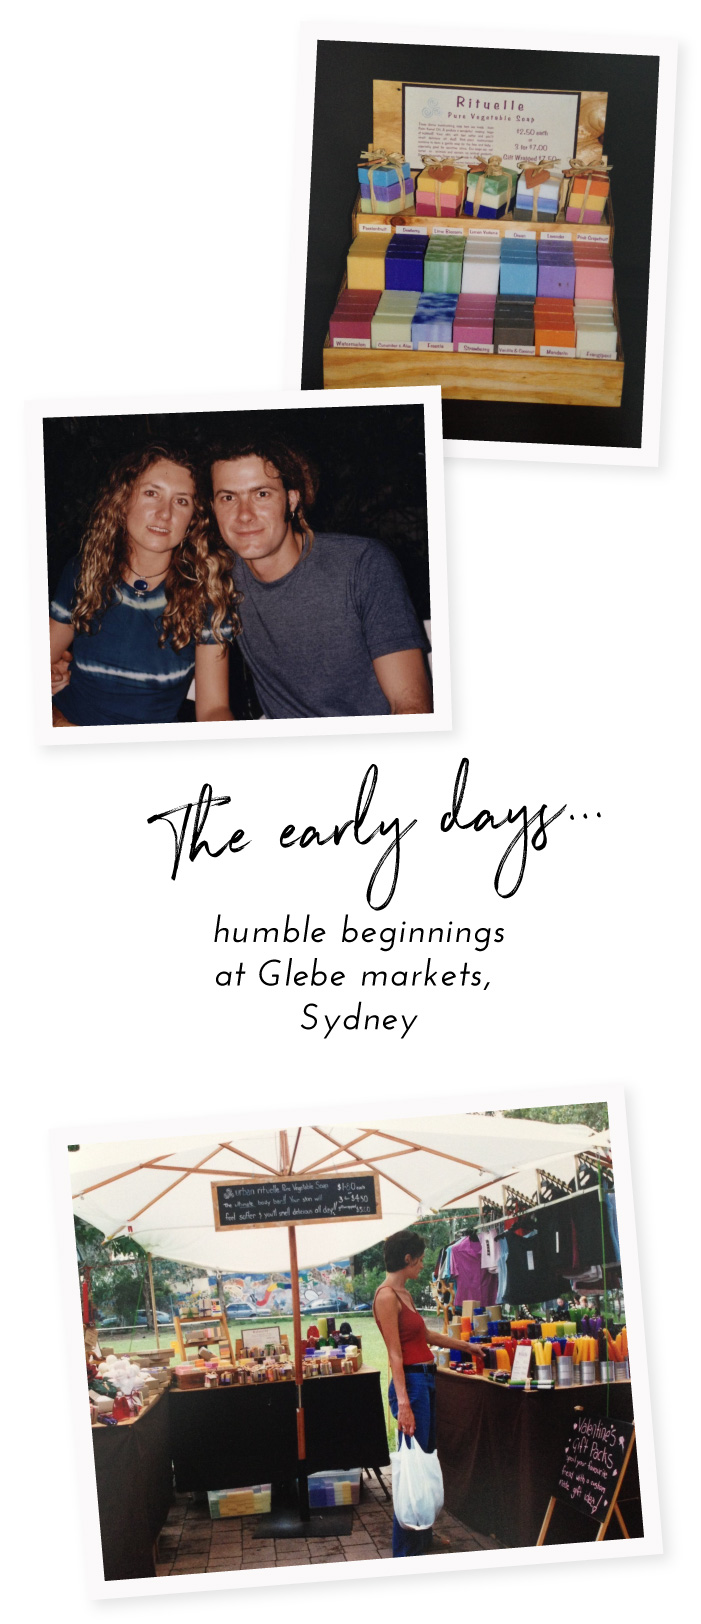 The early days... humble beginnings at Glebe markets, Sydney